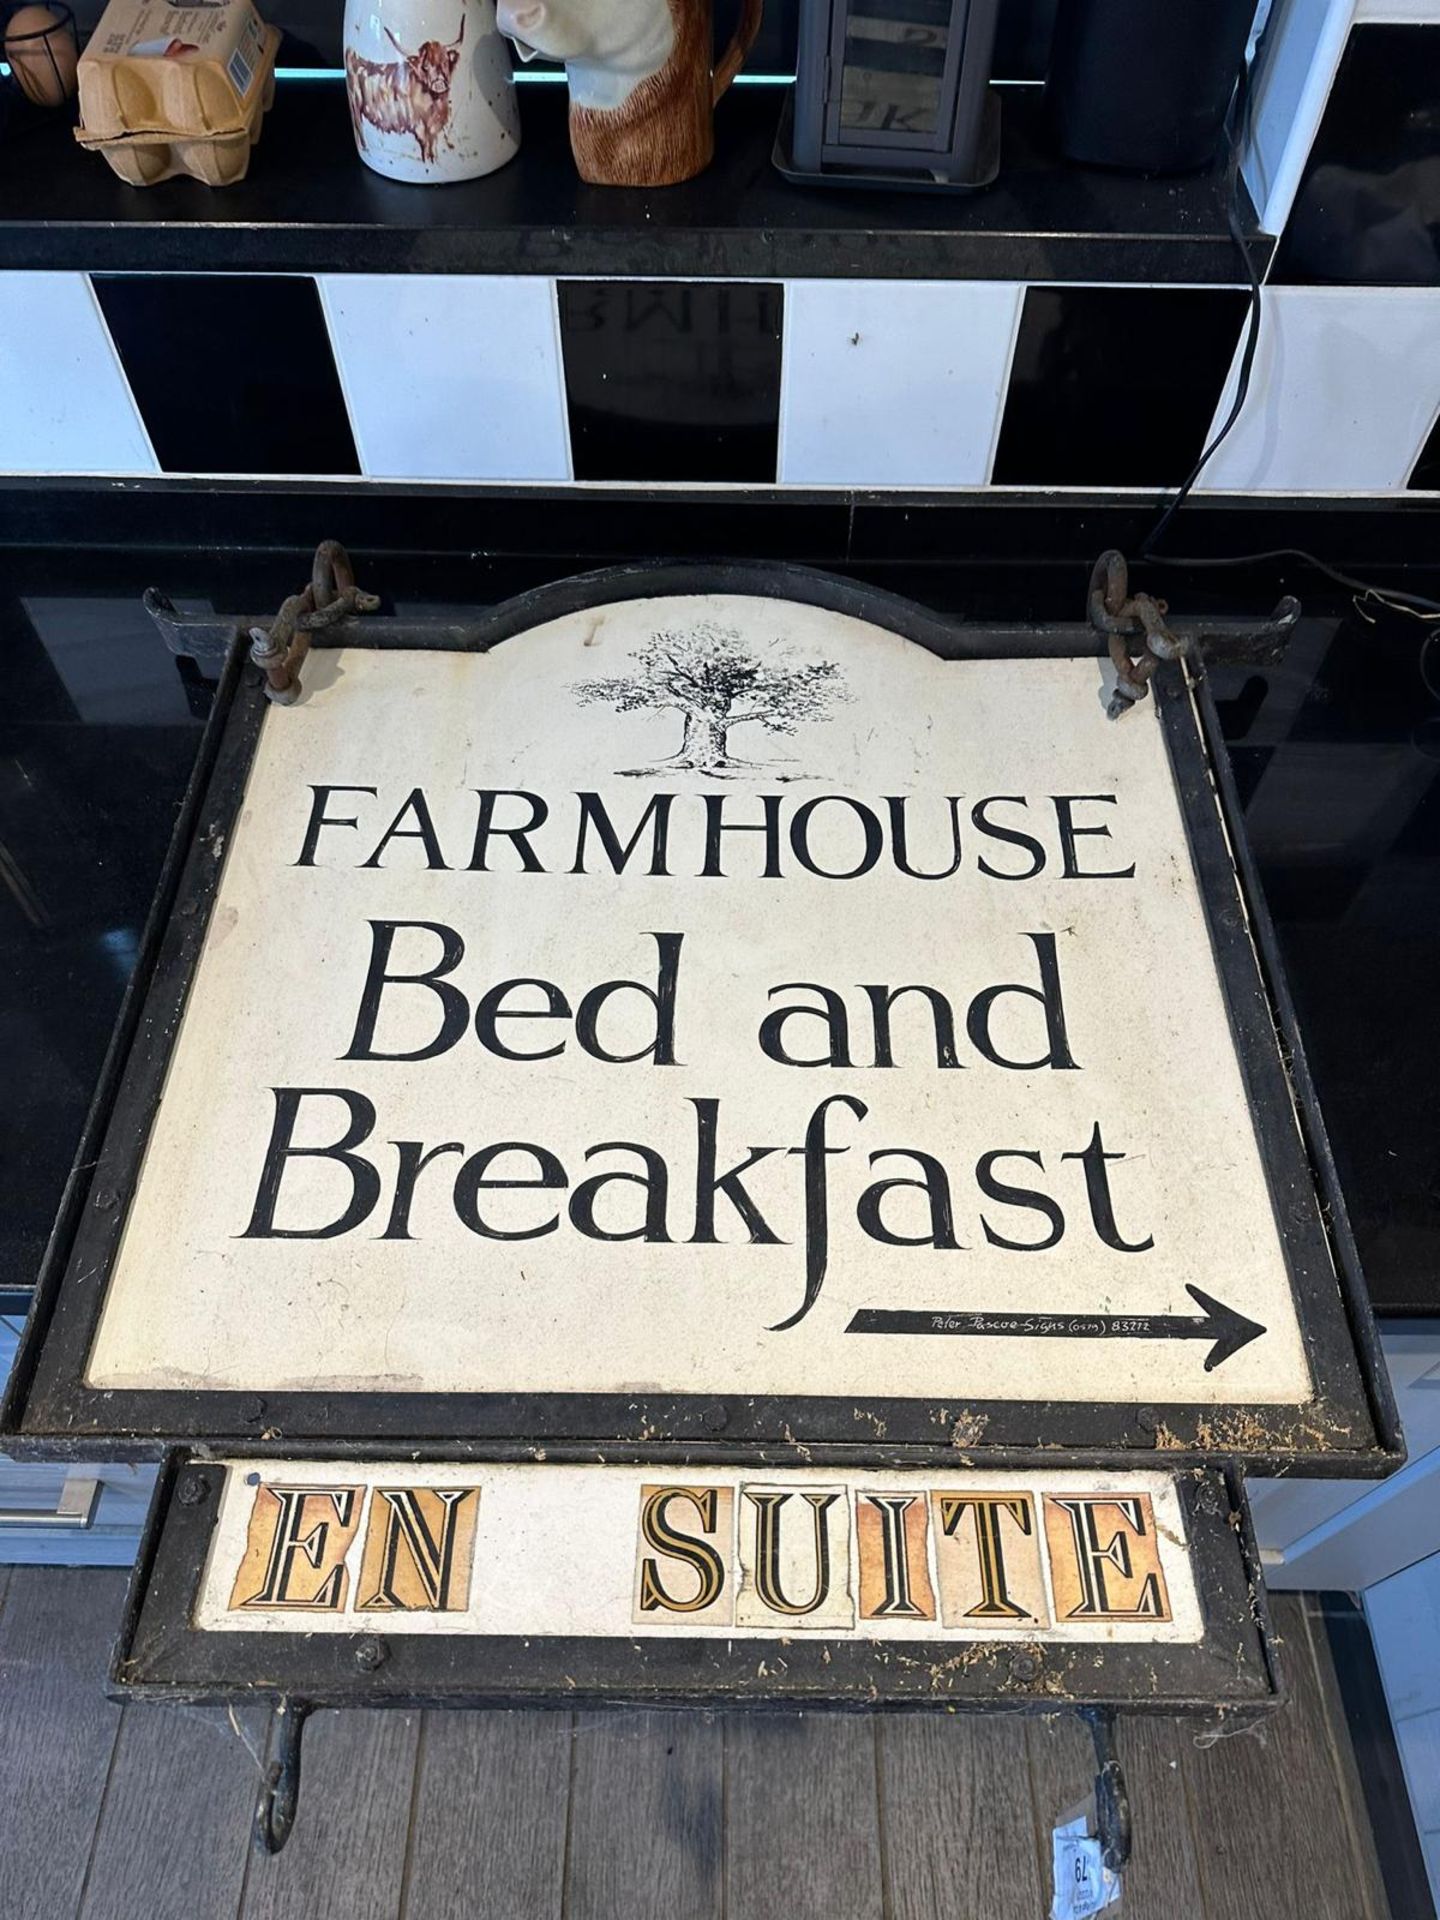 A vintage advertising Farmhouse Bed and Breakfast sign, approx 63 x 70cm (25 x 27.